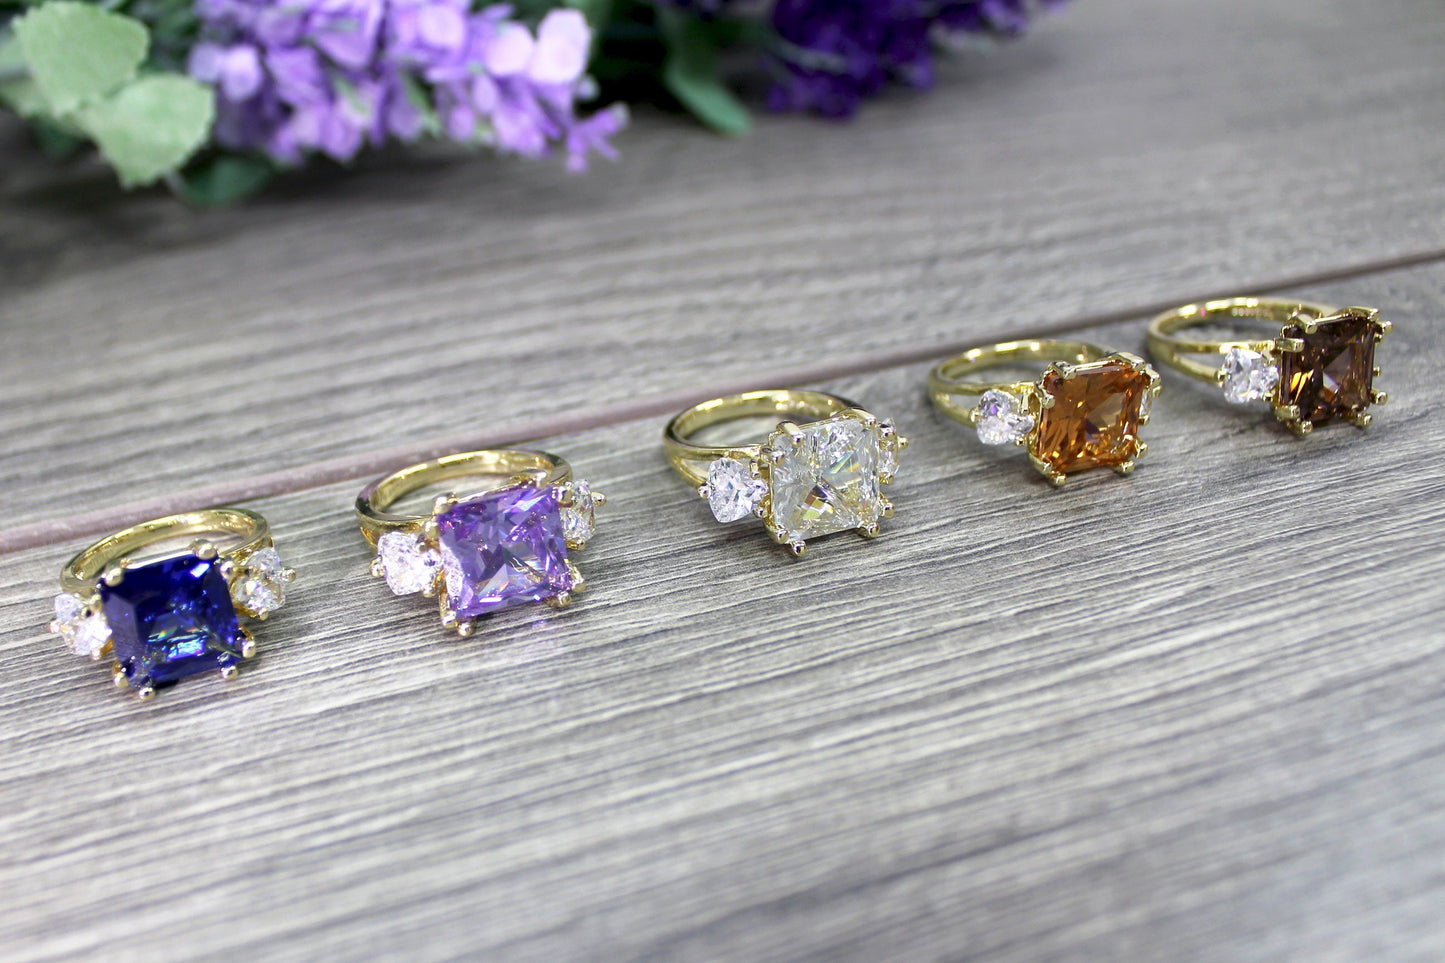 18k Gold Filled Princess Cut Three Stones Ring Featuring Color Cubic Zirconia Stones Combination Wholesale Jewelry Making Supplies